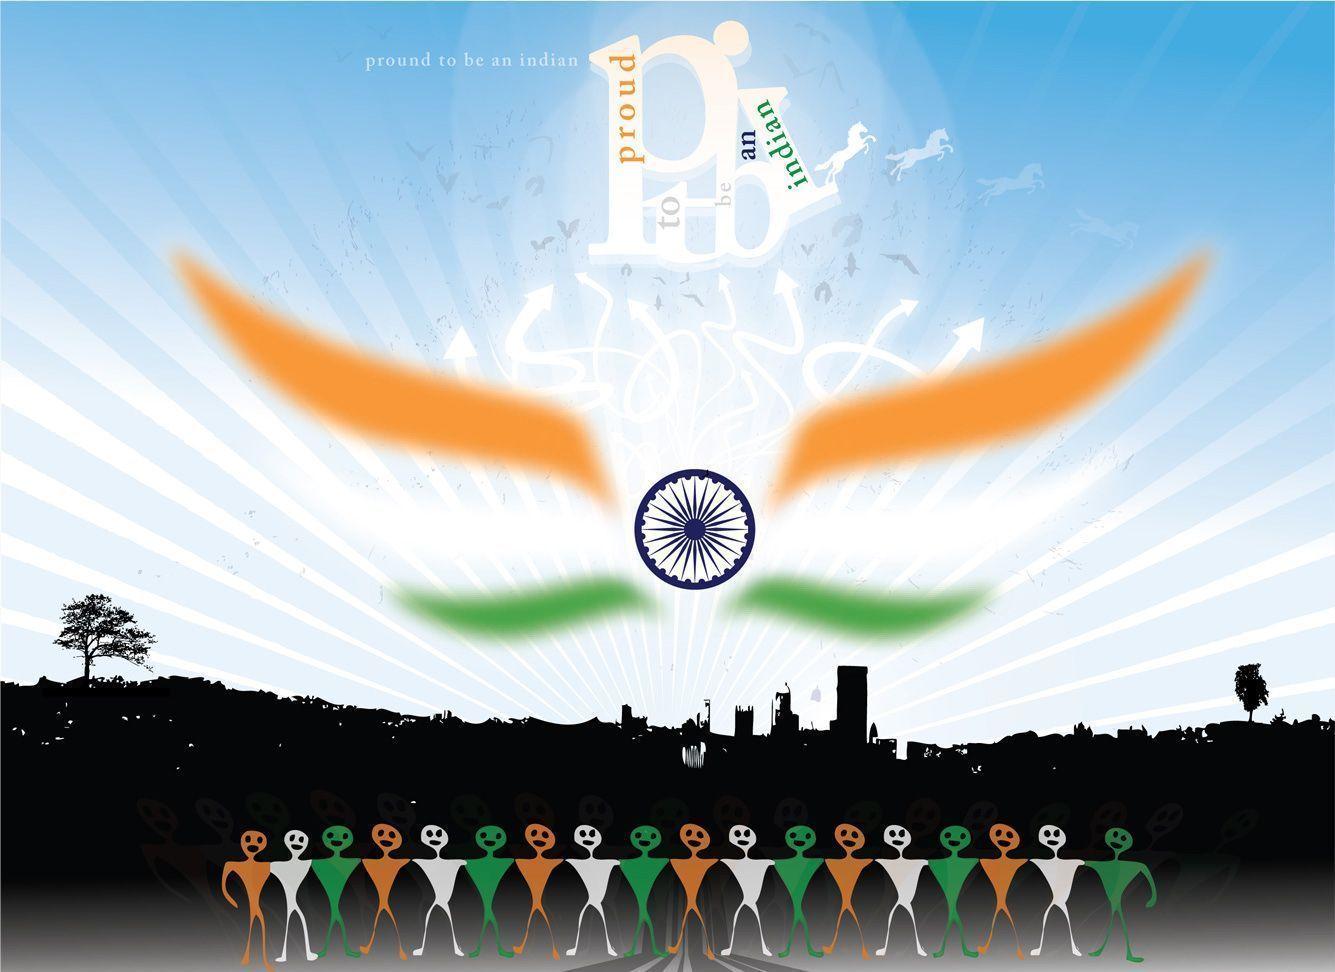 Incredible India Wallpaper. Proud to be Indian